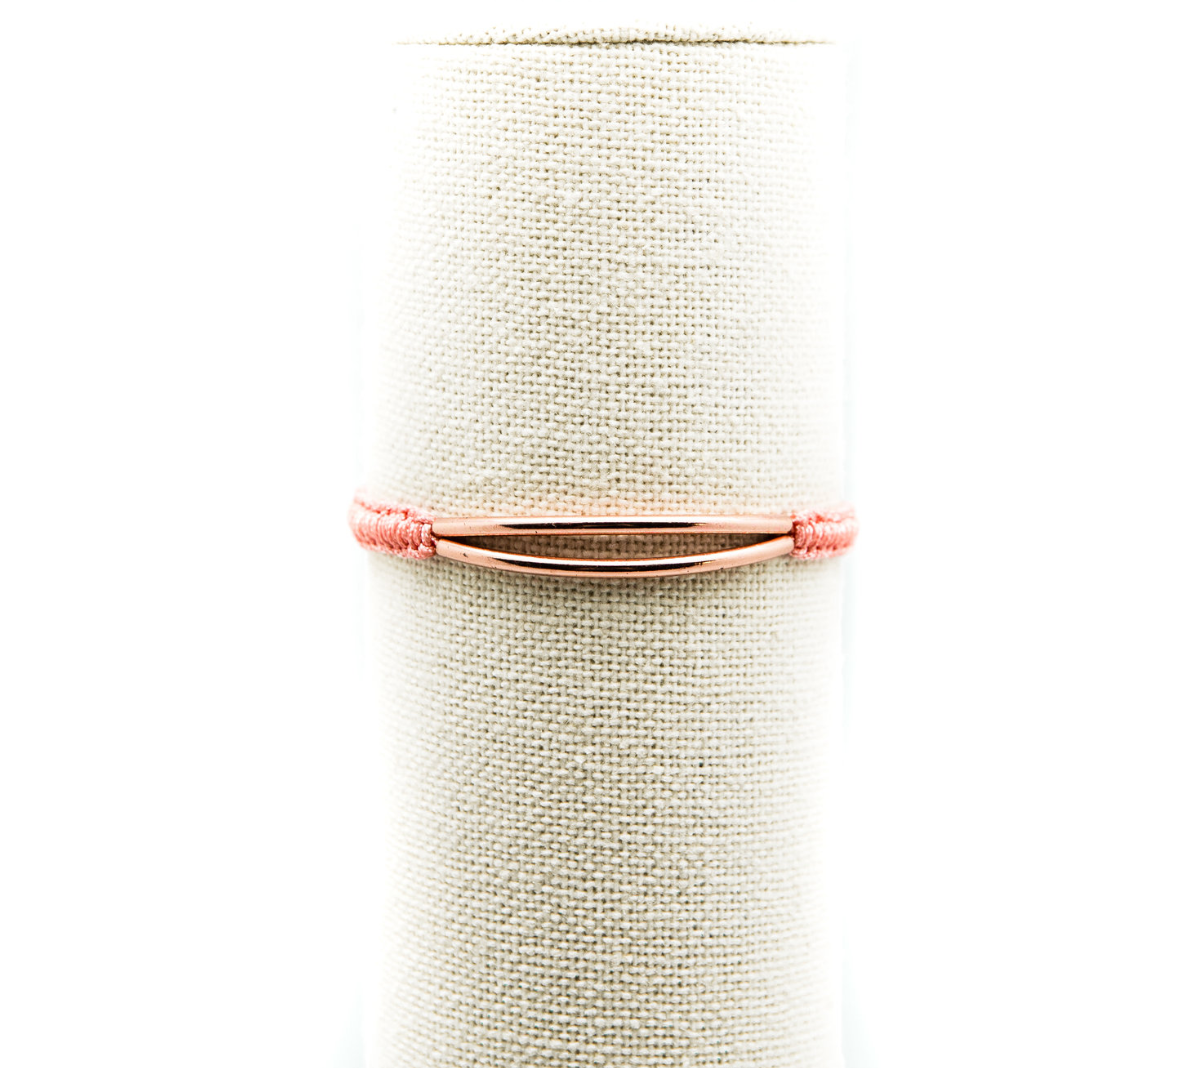 Juxli Home Apple Watch Bands Recommendation for Bracelet by Pearl Love